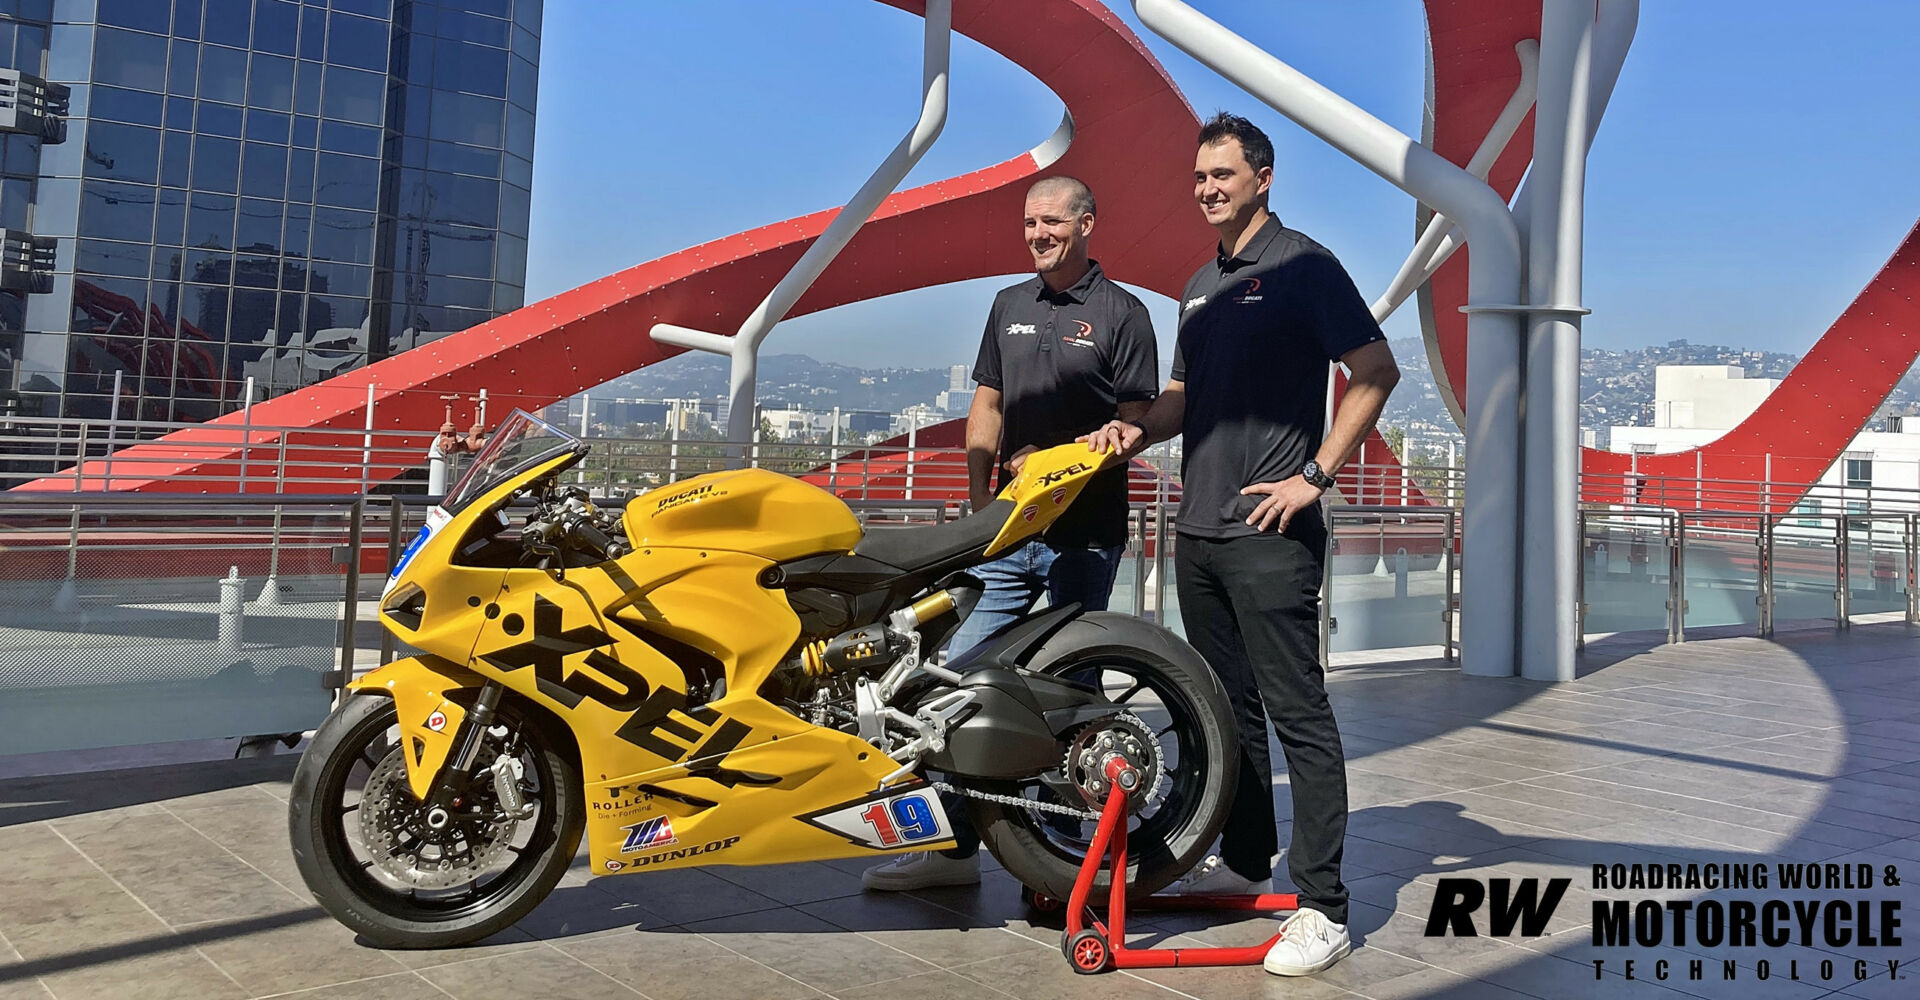 Graham Rahal (right) brought on Superbike World Champion Ben Spies (left) to help run Rahal Ducati Moto Team and get the best from its riders in the MotoAmerica Supersport series. It's an indication that the new team is serious about racing and winning, and is bringing its world-class level of publicity and professionalism to the series. Photo by Michael Gougis.